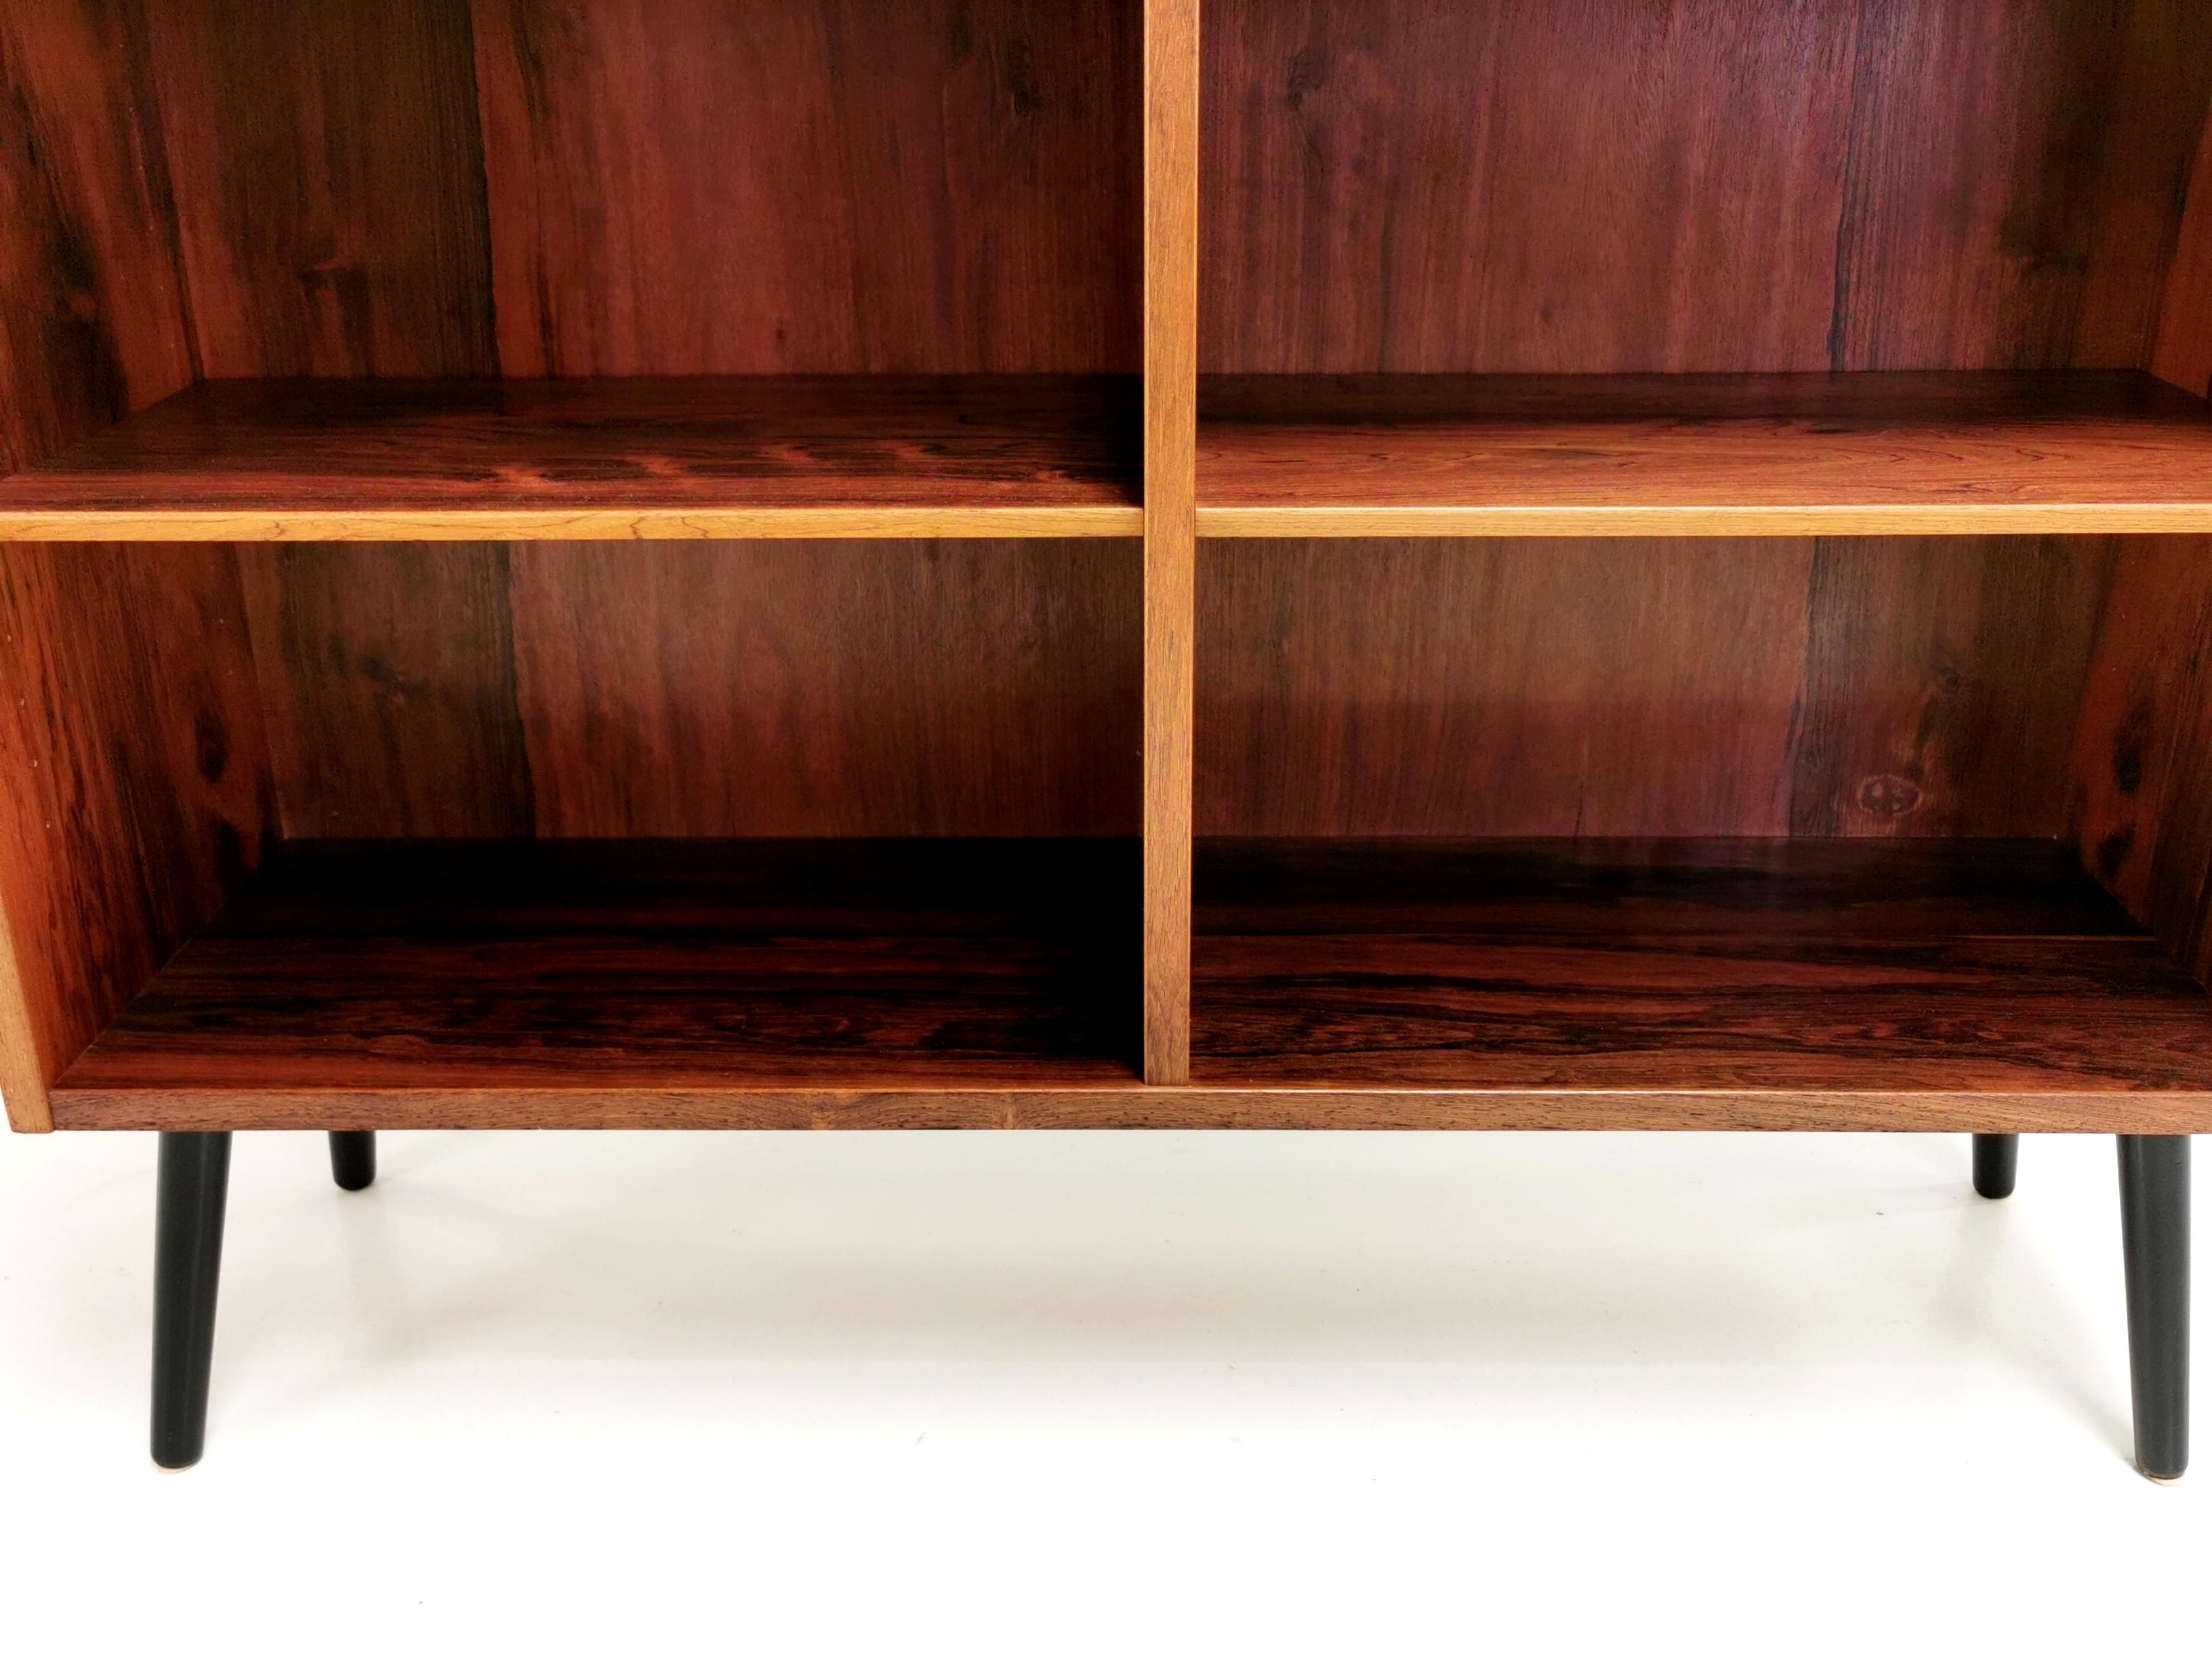 Danish rosewood bookcase

High-quality made rosewood bookcase by Carlo Jensen. 

Made in Denmark, by the Hundevad Company, circa 1970s.

Adjustable shelving. This bookcase is raised on splayed ebonized wooden legs.

Dimensions (cm): 

108